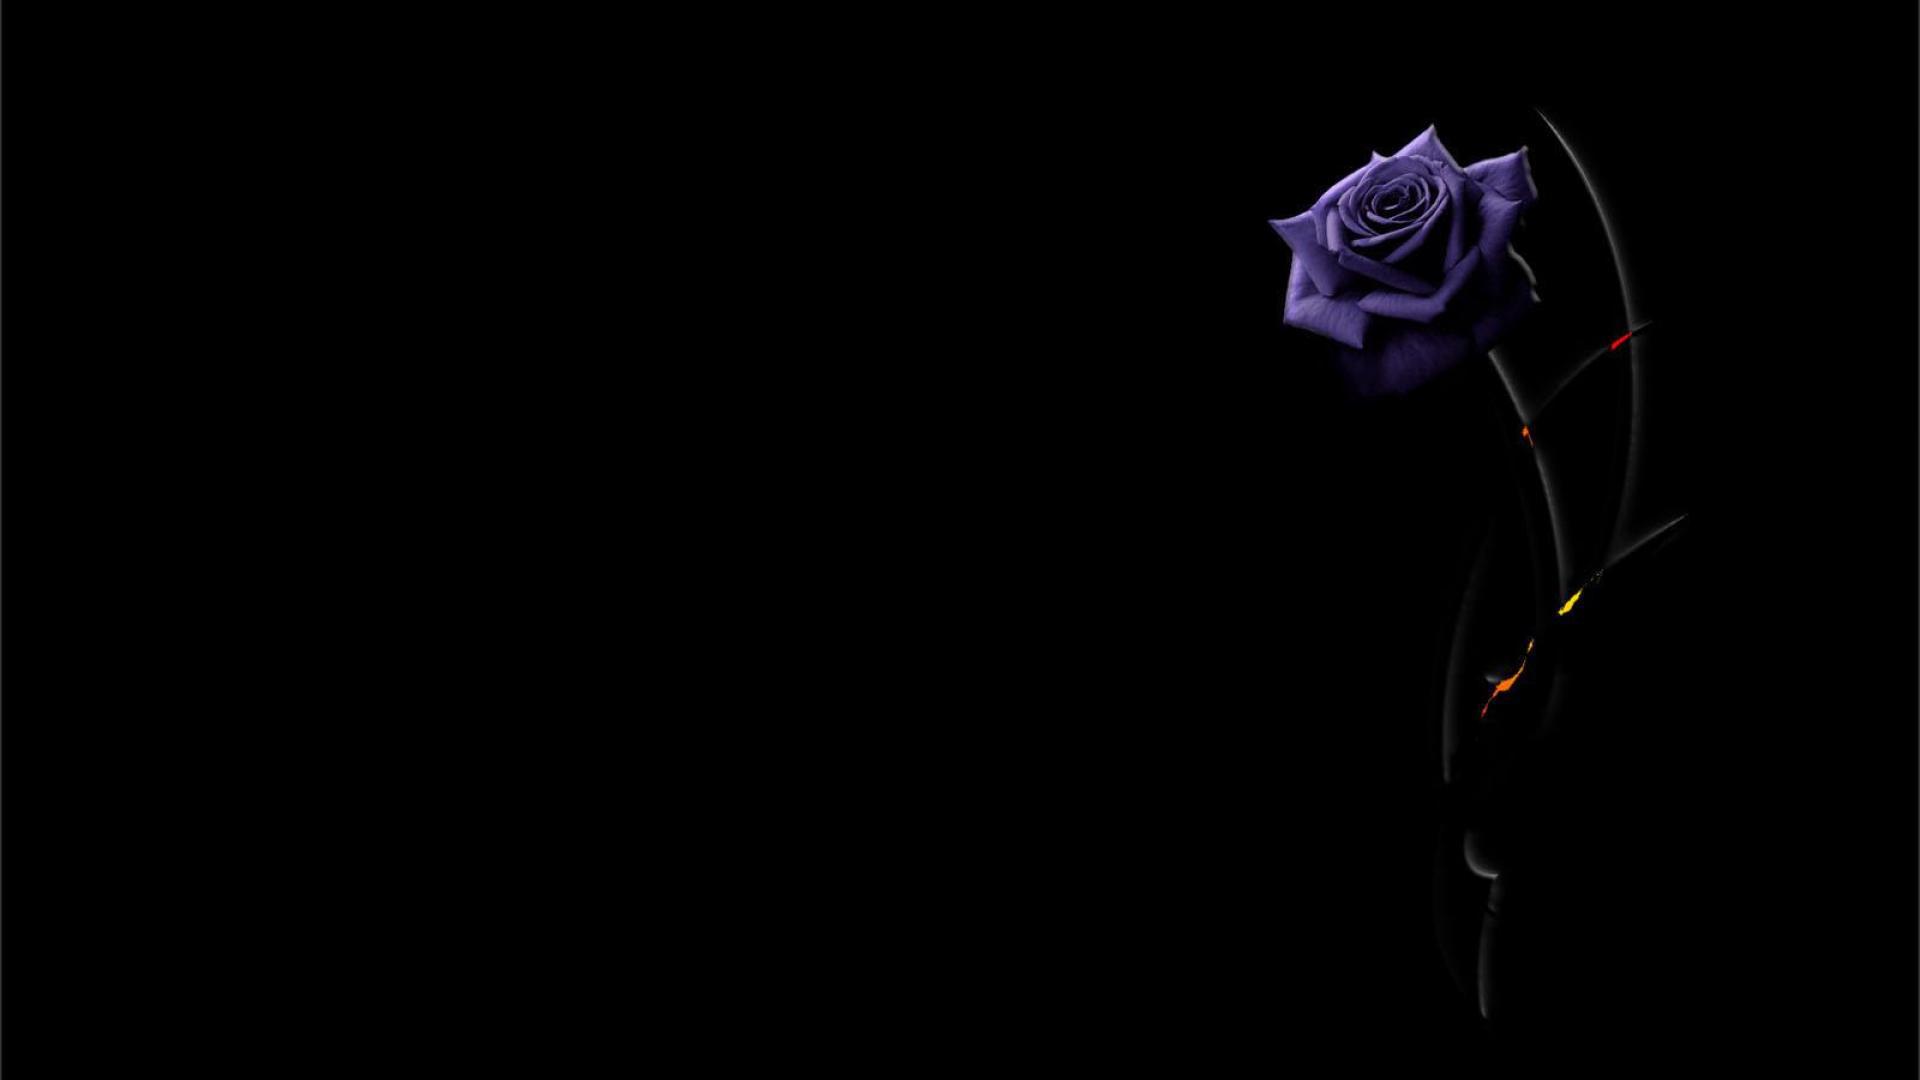 Beautiful purple rose on a black background wallpapers and images 1920x1080